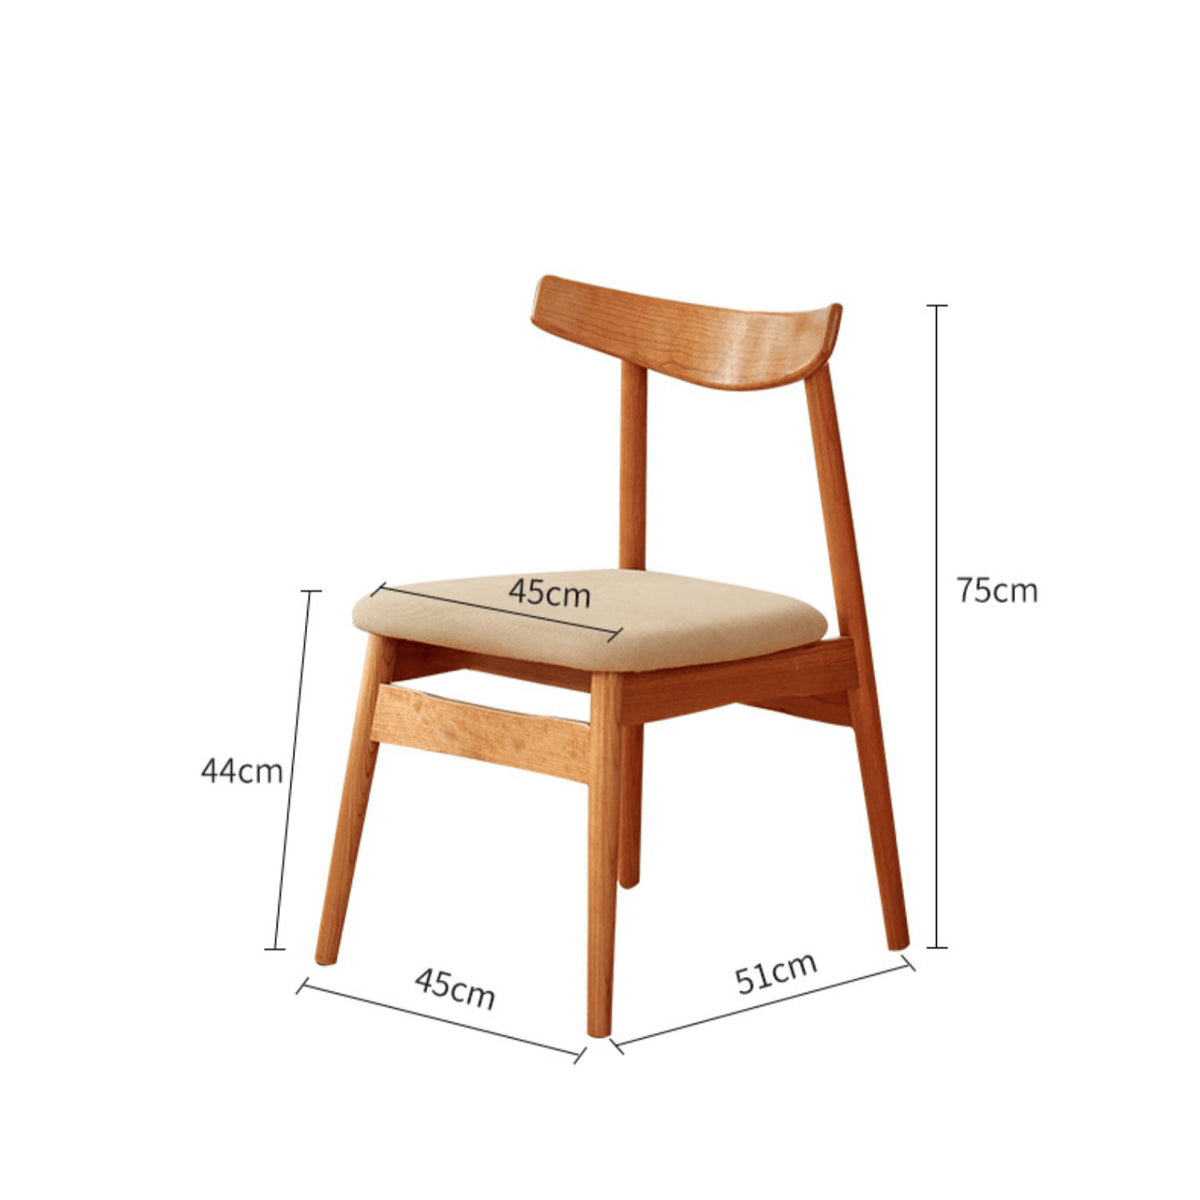 Elegant Red Oak Wood Chair with Natural Finish and Comfortable Cotton Seat fyg-659